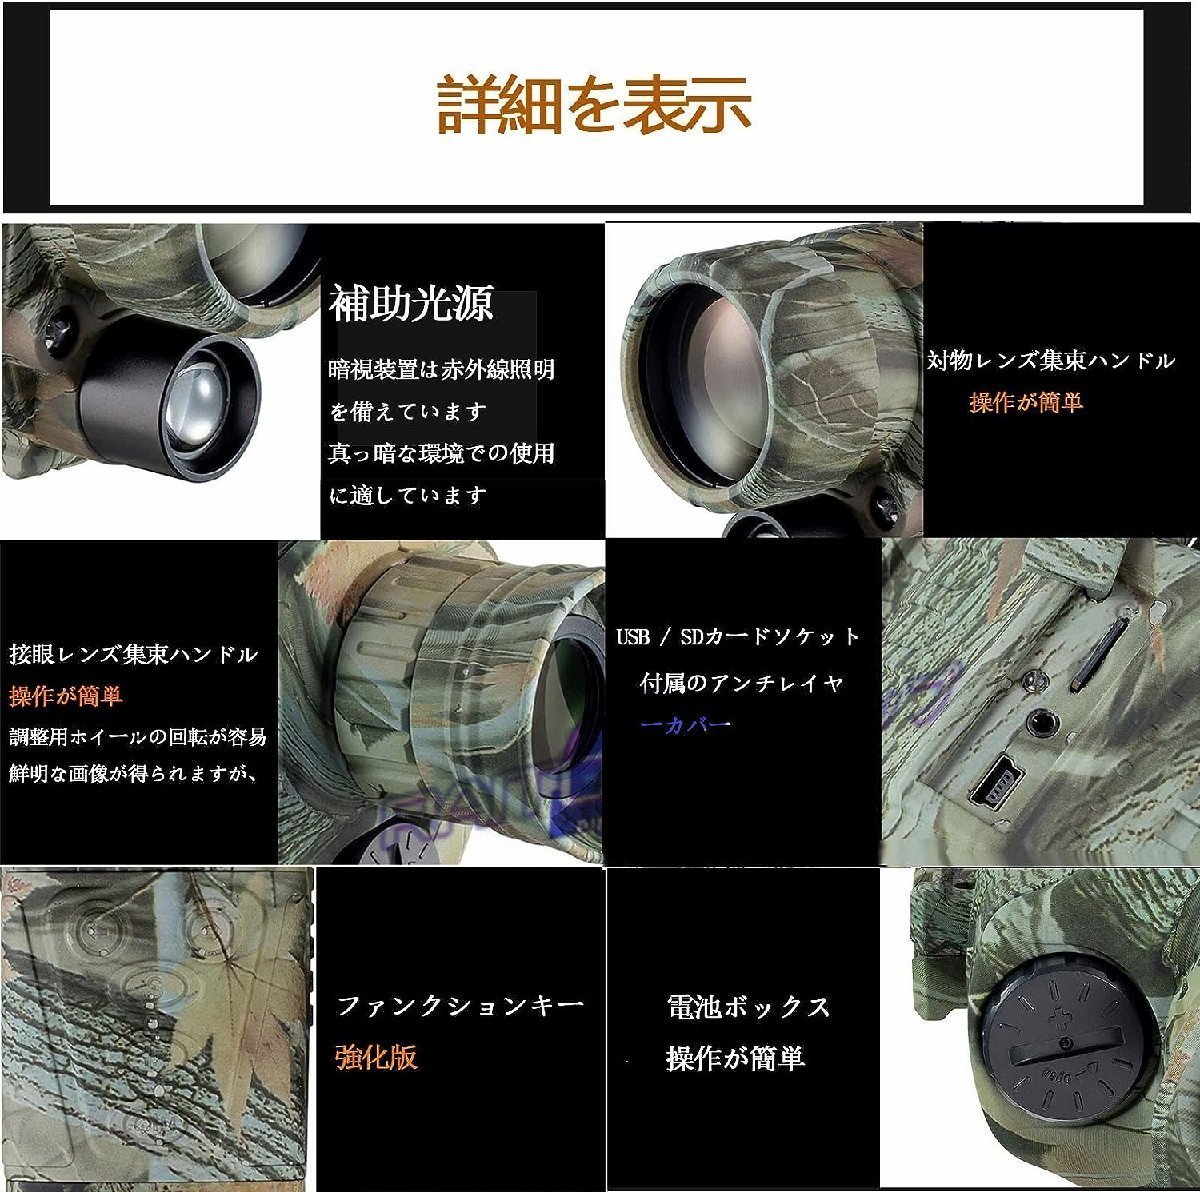  night vision scope army for infra-red rays digital camera night vision height magnification telescope night vision mirror super zoom photographing video recording day and night combined use monitoring hunting field observation storage sack attaching 